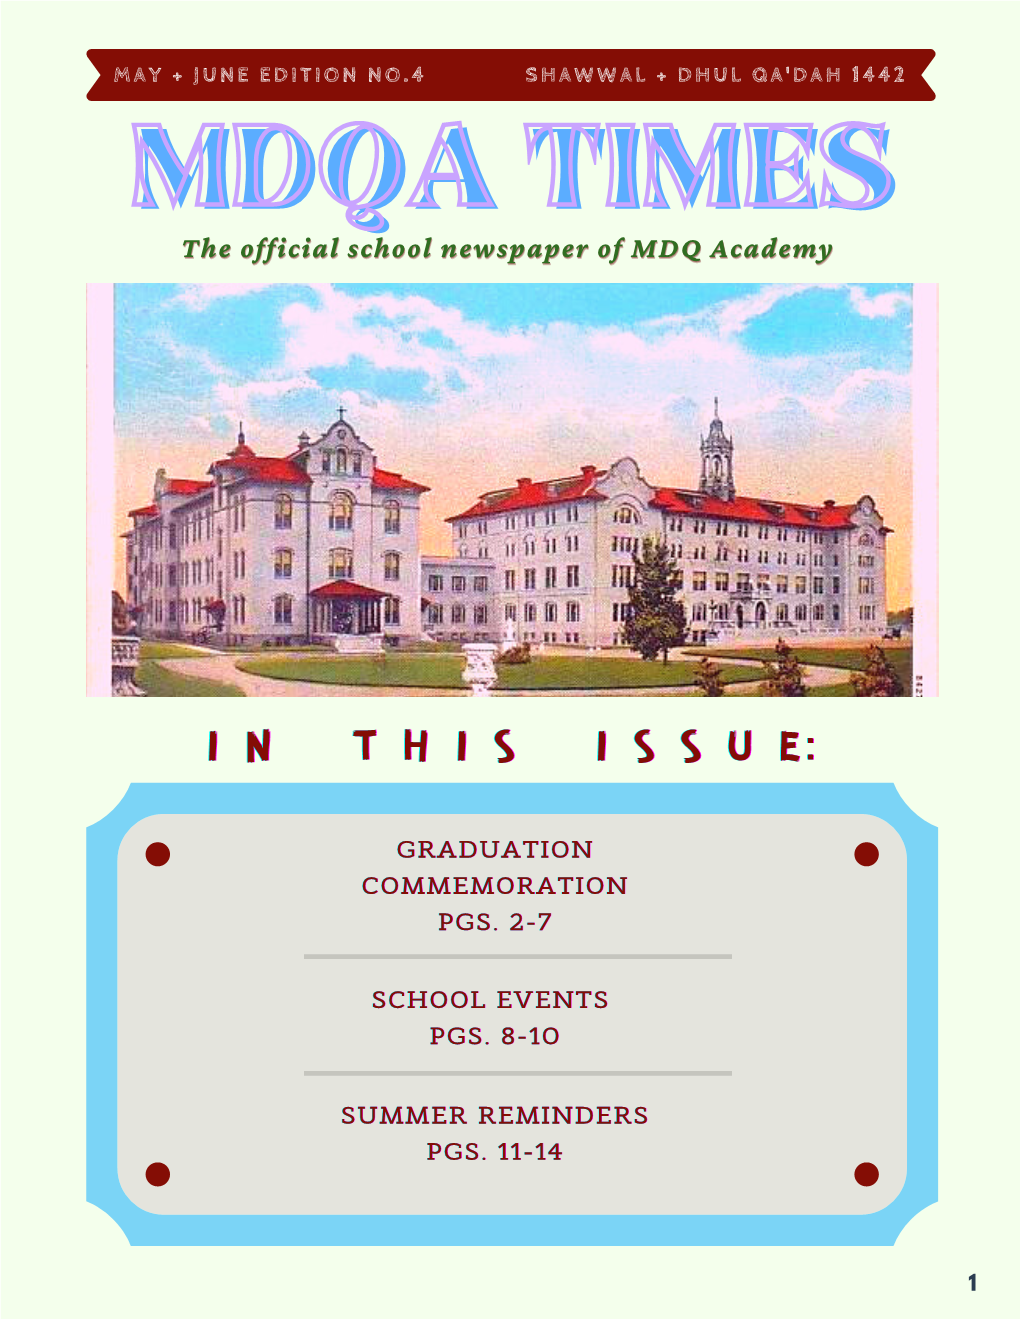 Latest Edition of MDQA Times